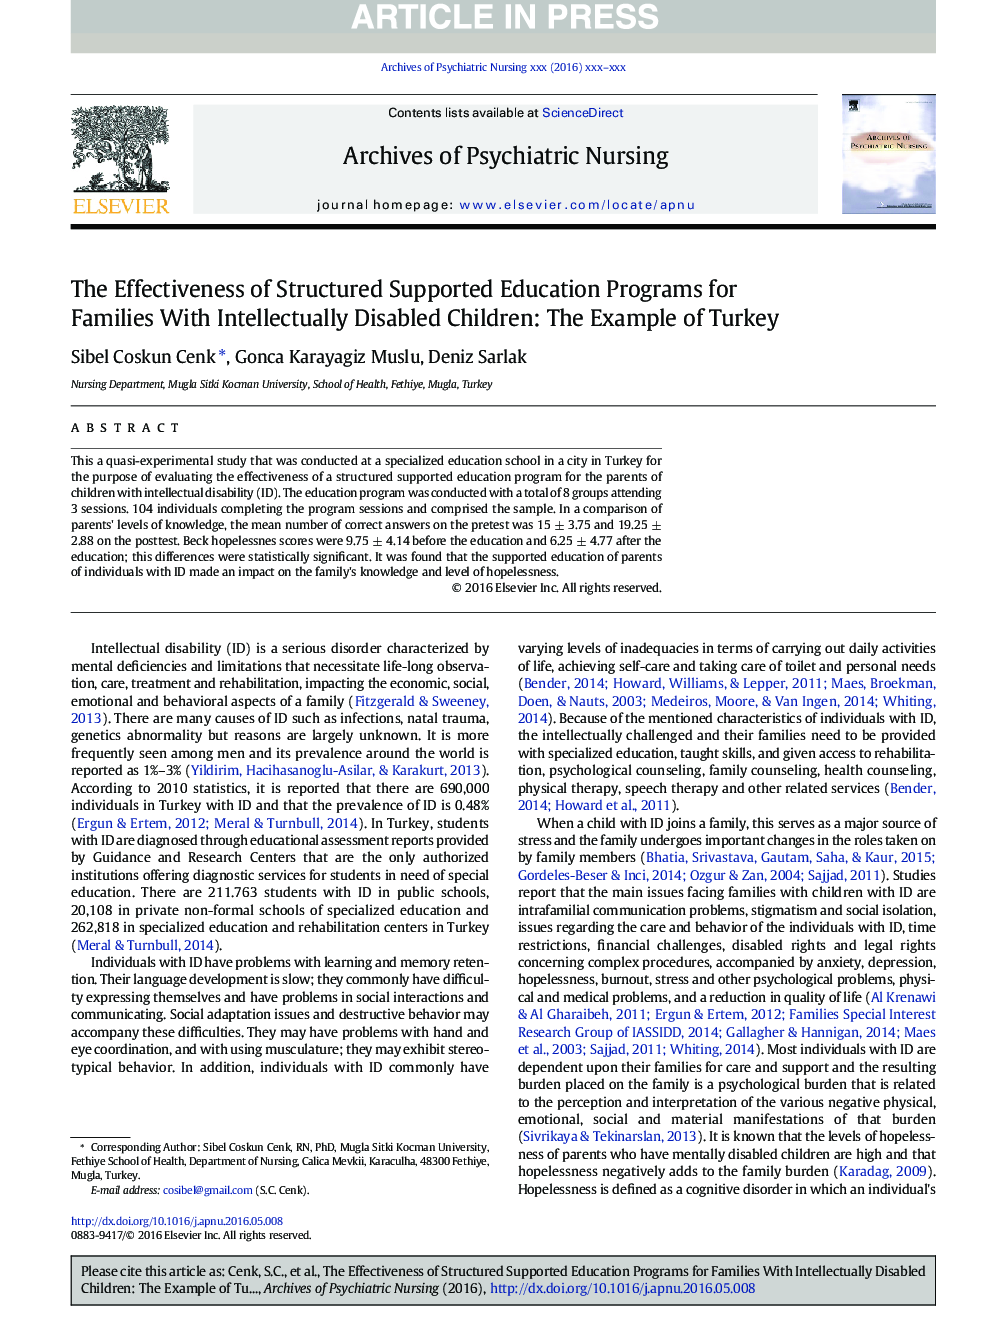 The Effectiveness of Structured Supported Education Programs for Families With Intellectually Disabled Children: The Example of Turkey